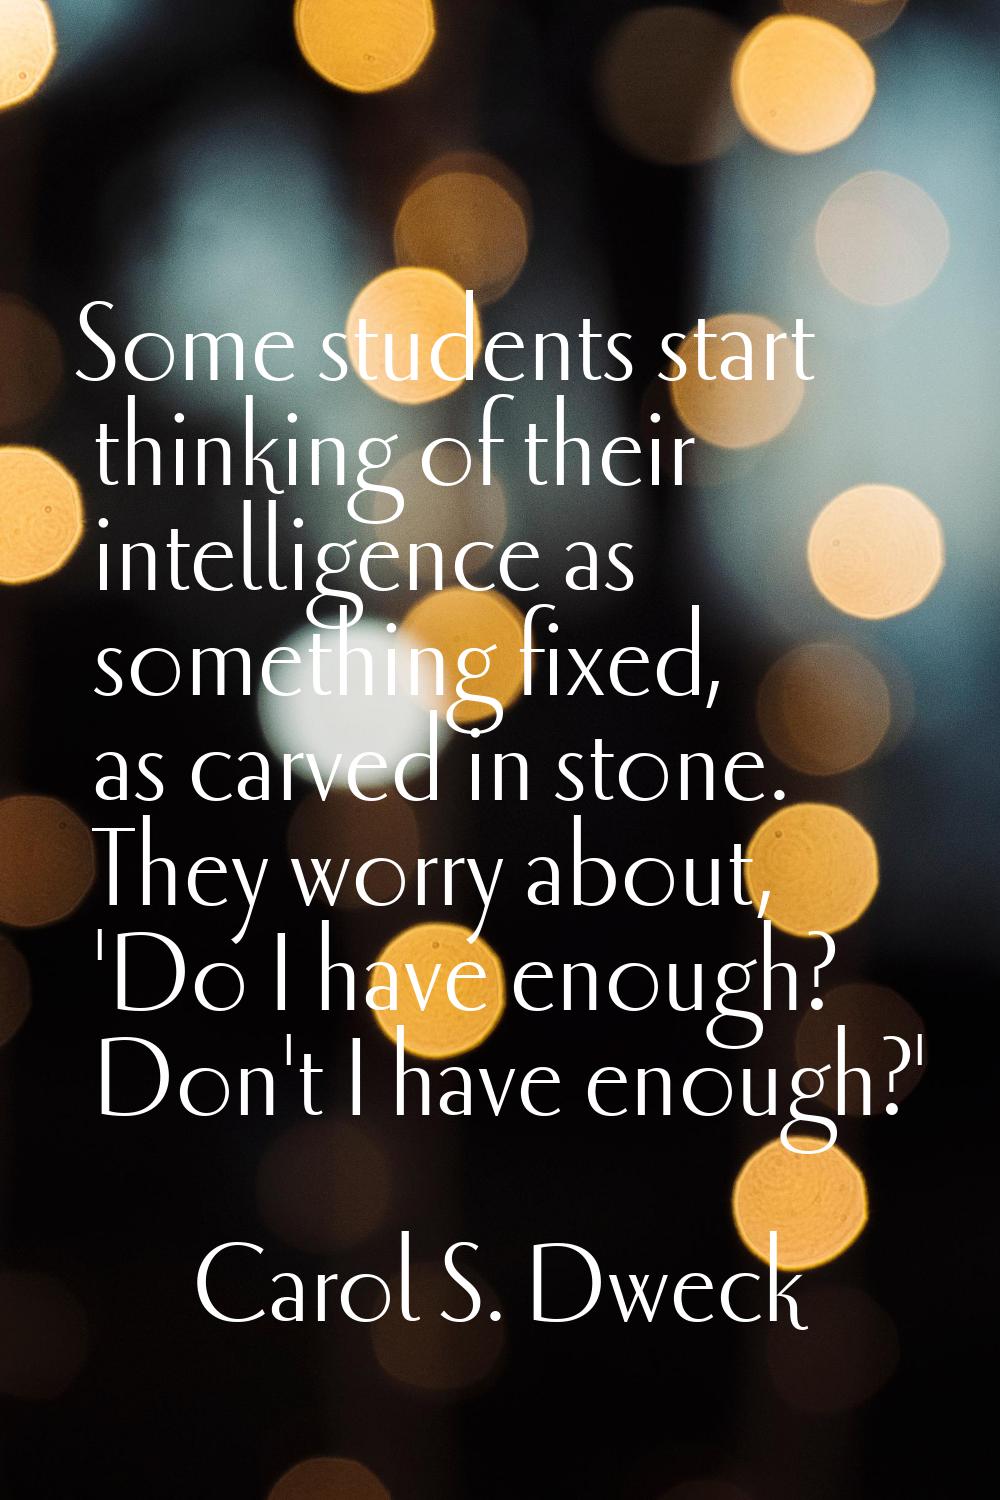 Some students start thinking of their intelligence as something fixed, as carved in stone. They wor